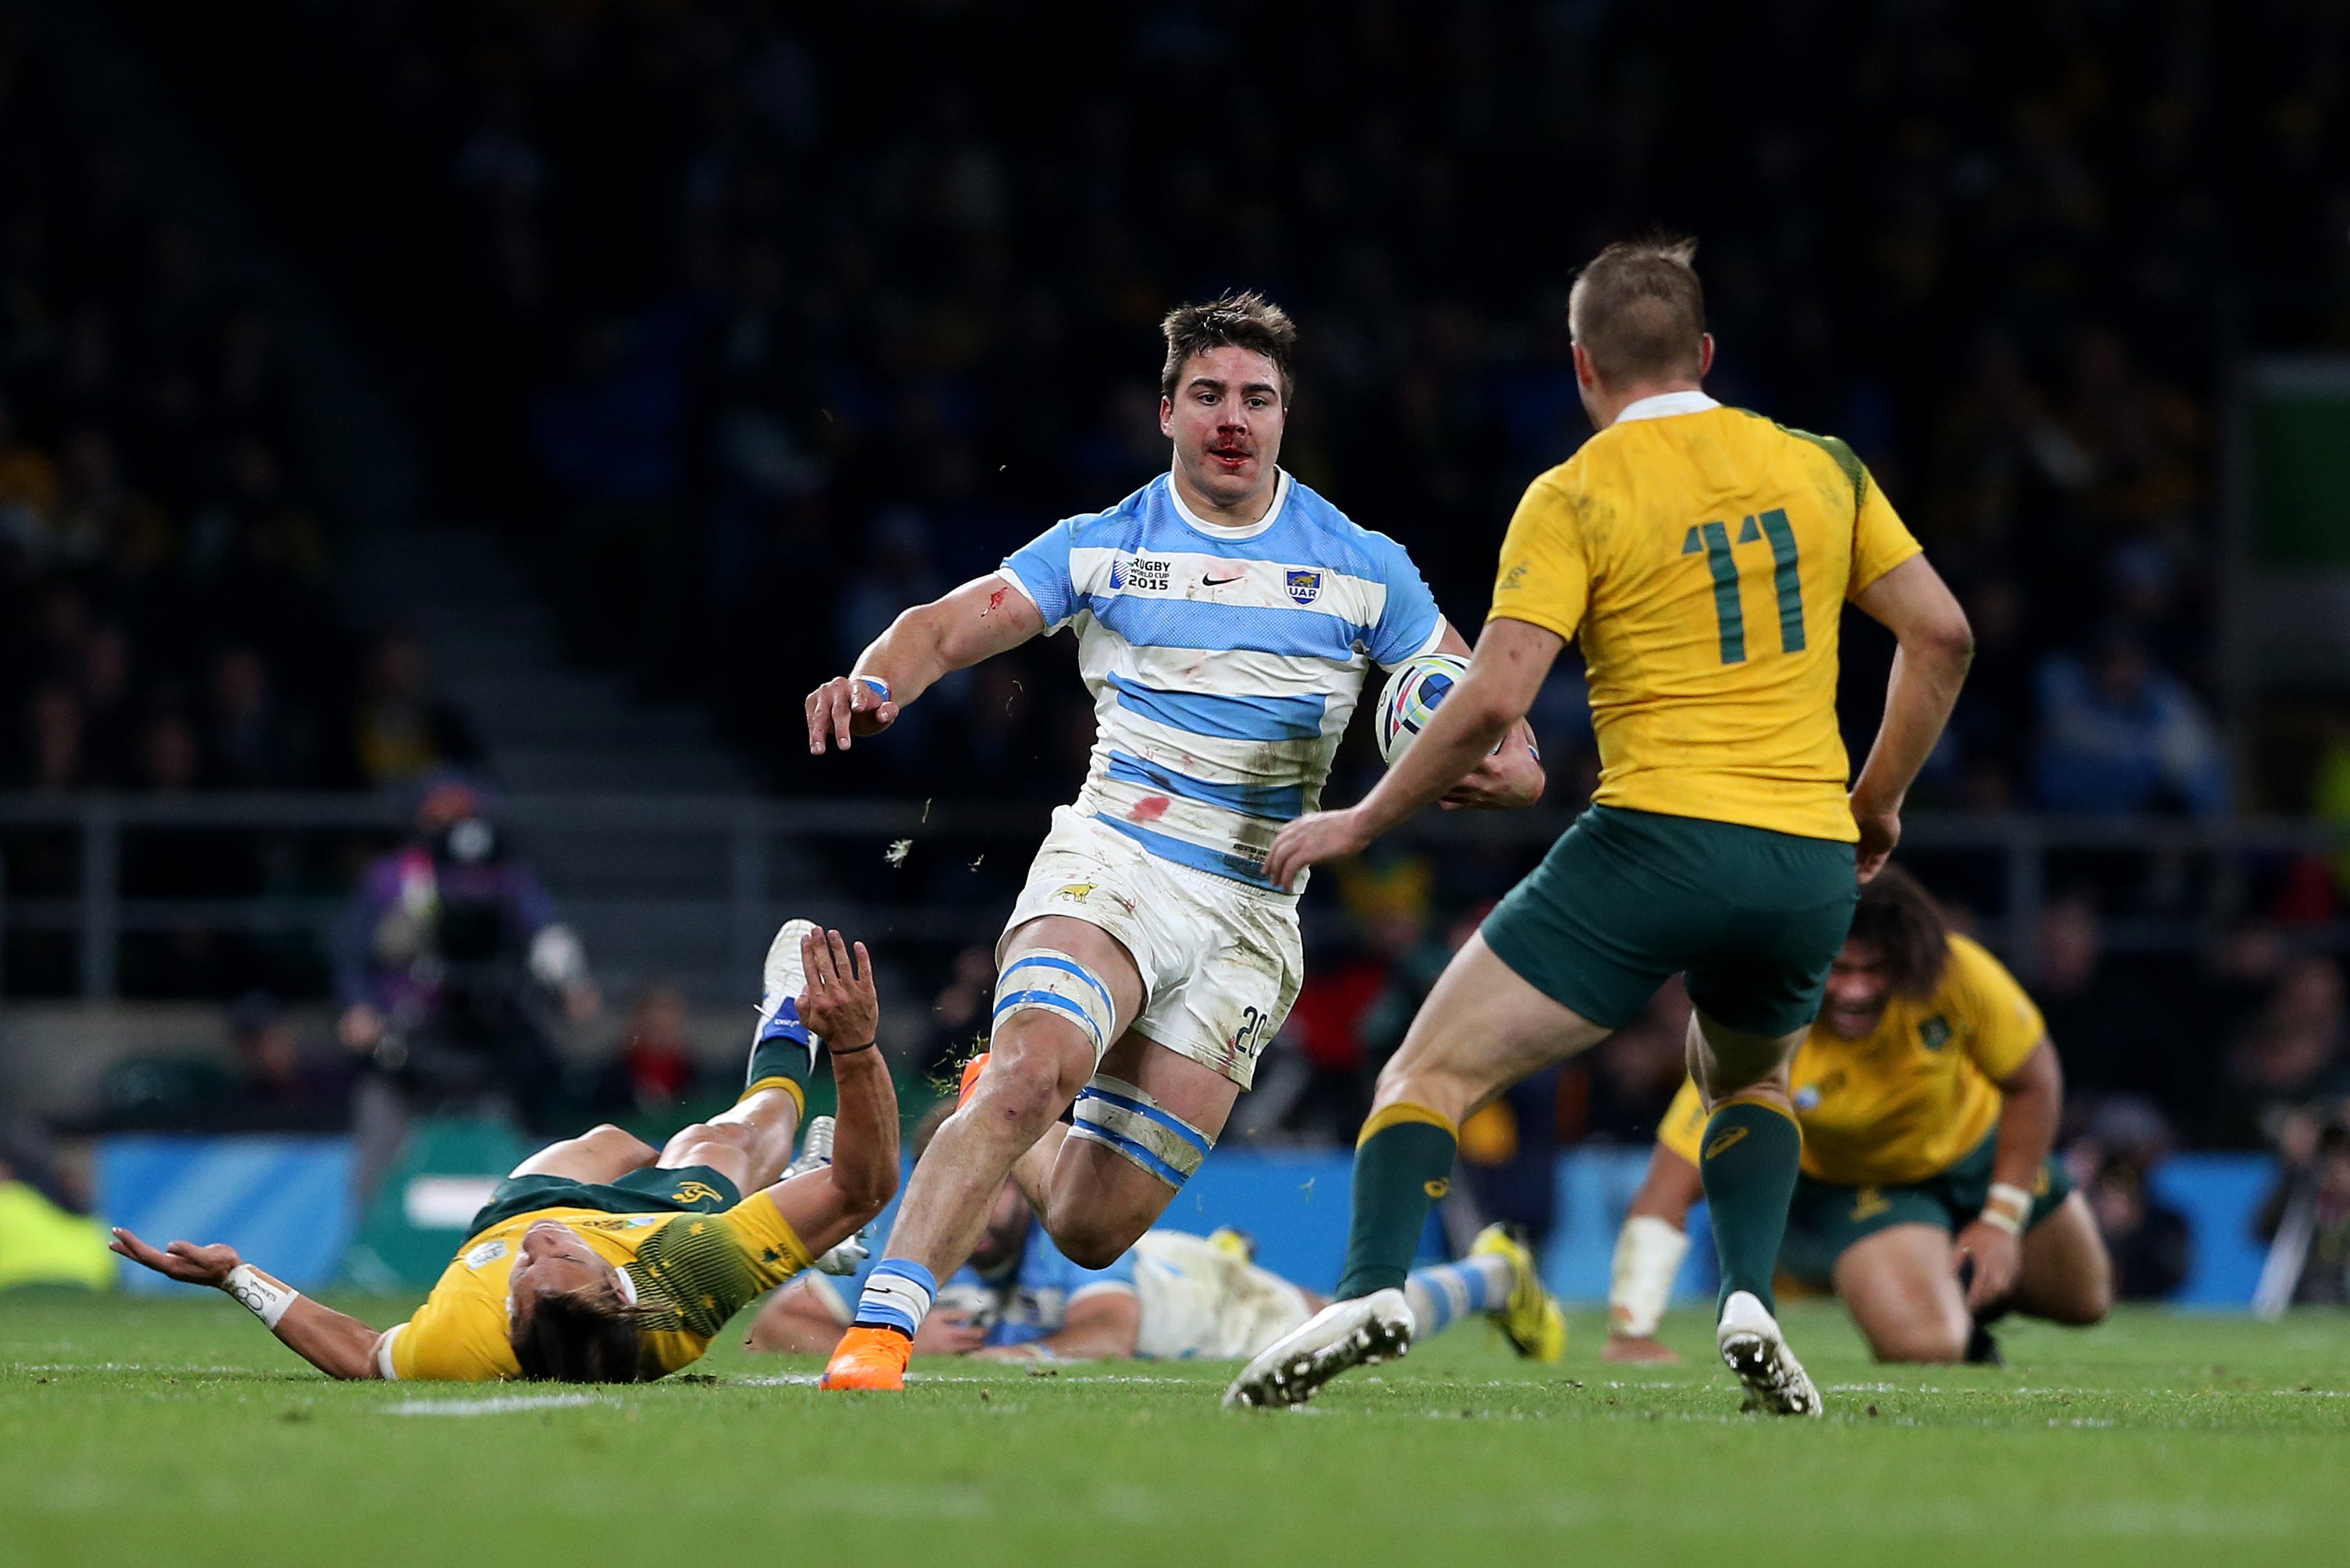 Argentina’s Facundo Isa (pictured) in Rugby World Cup action (Gareth Fuller/PA Images).